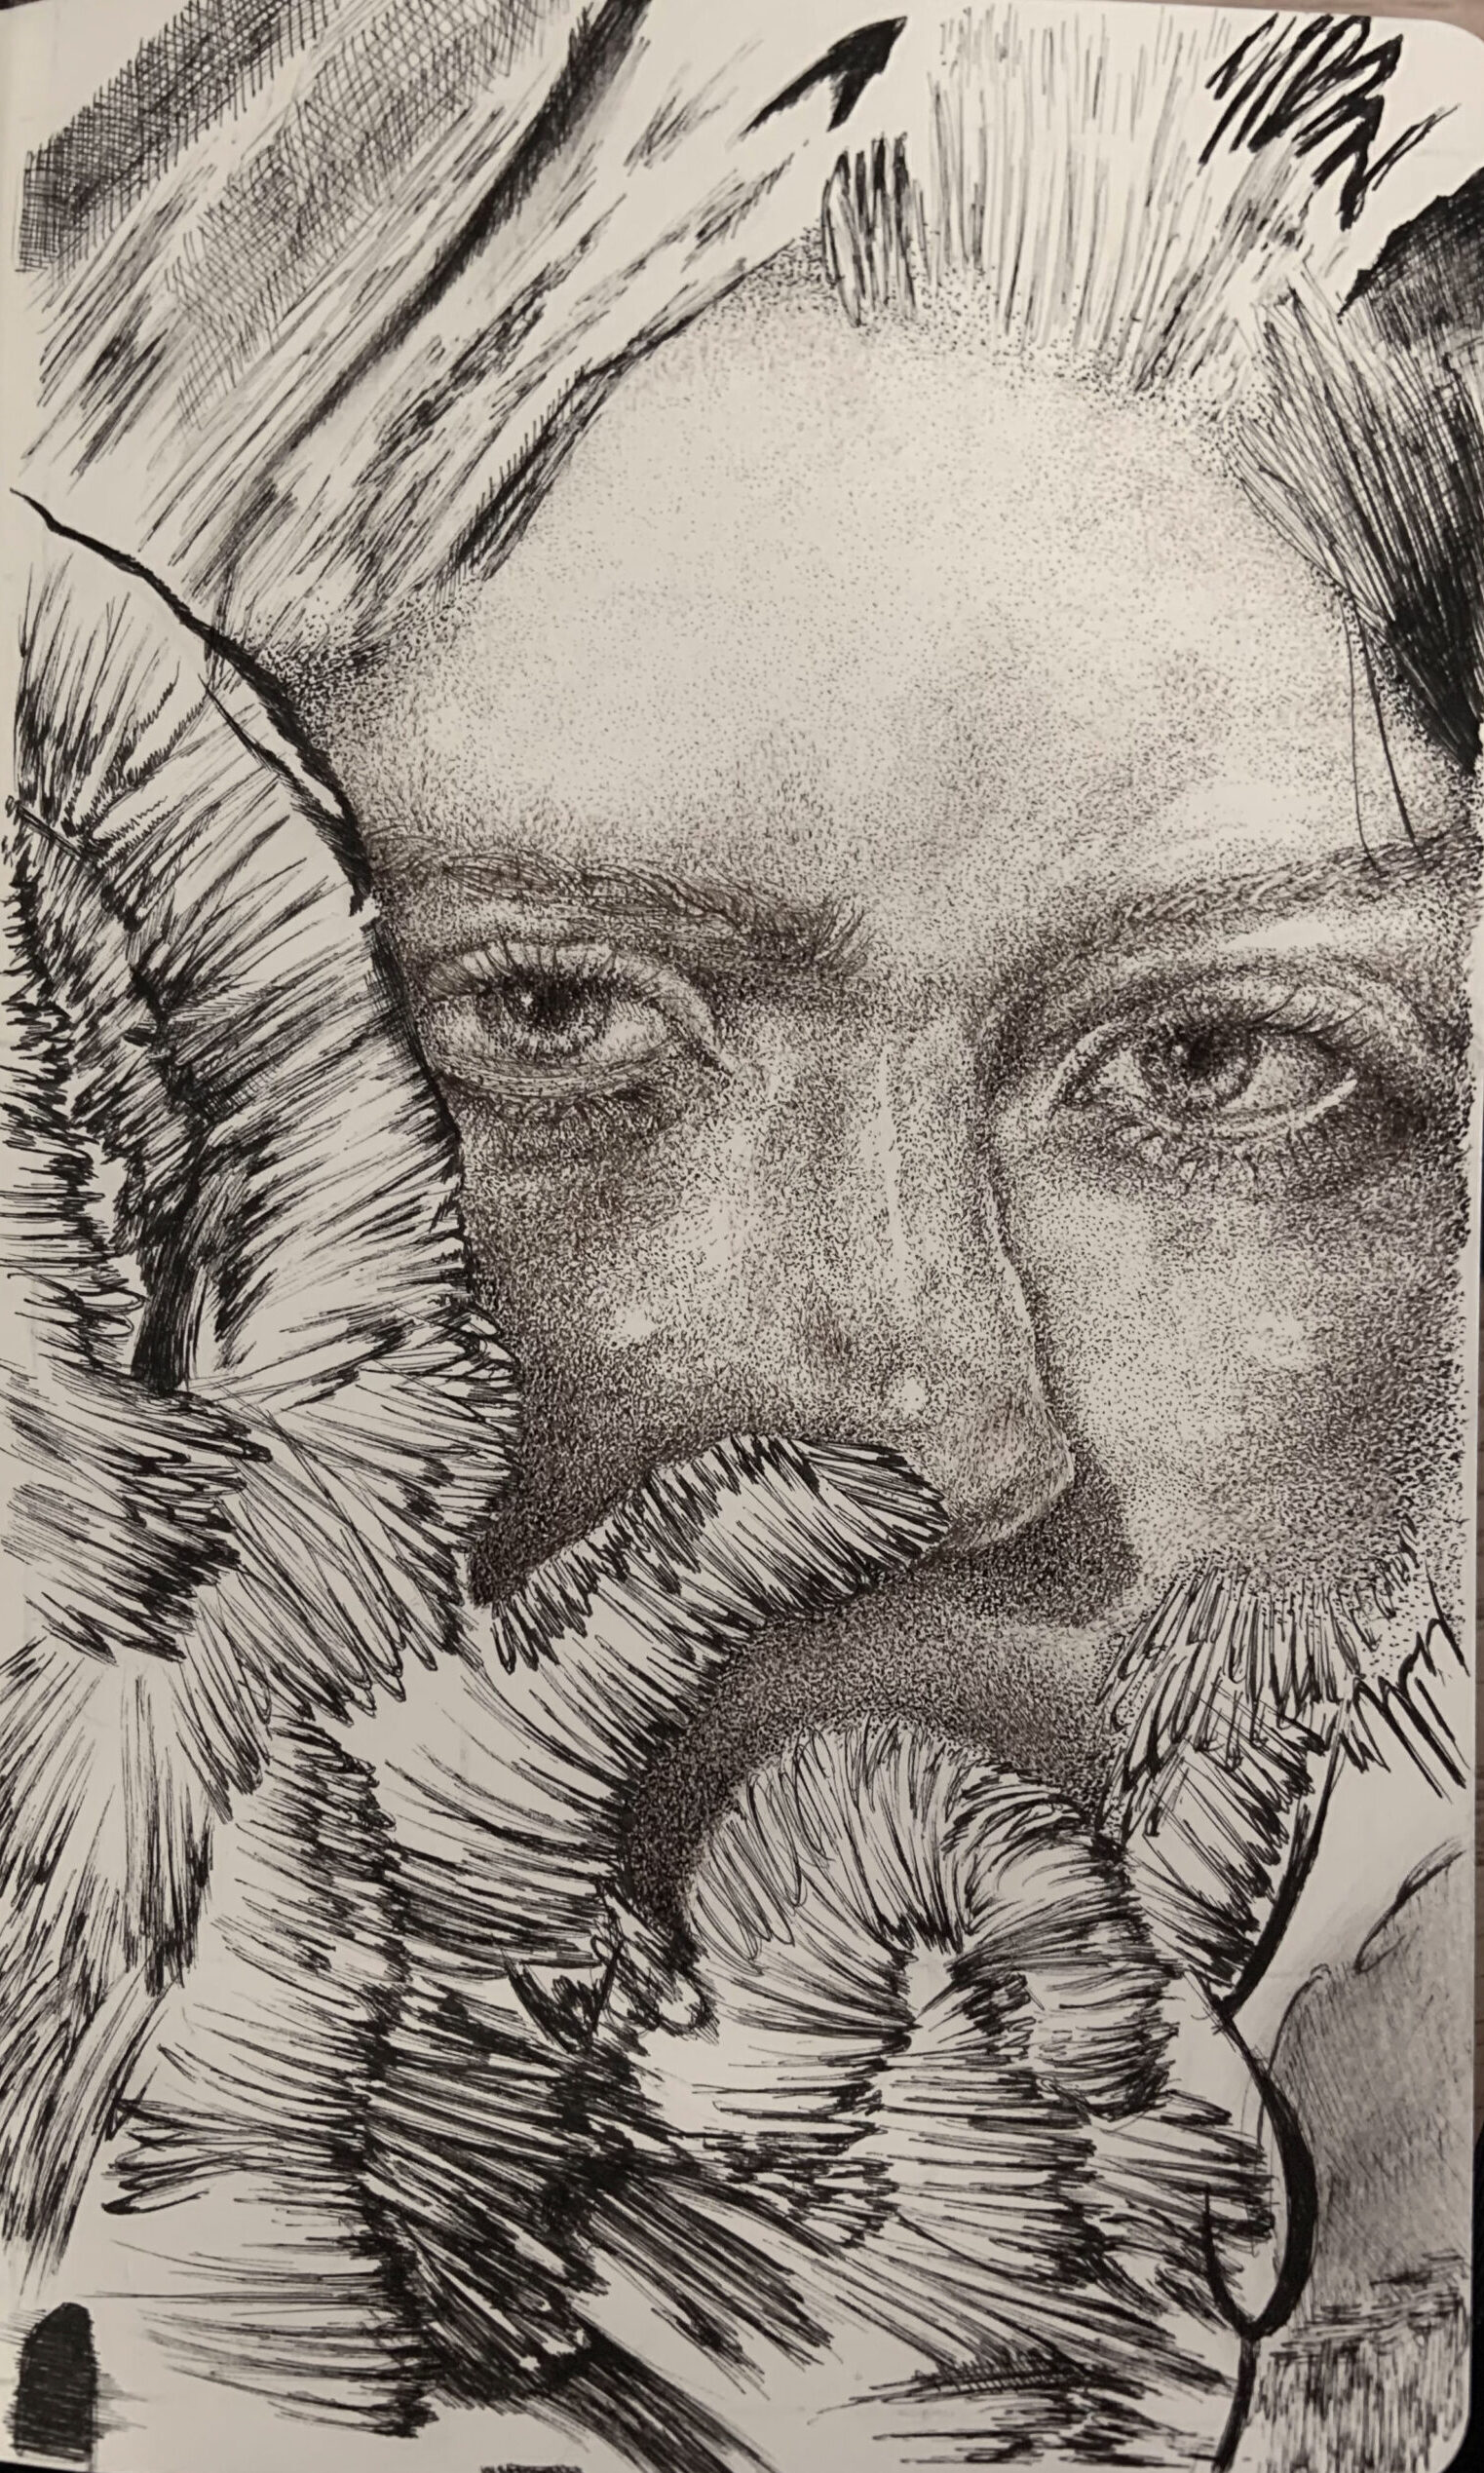 This image is a realistic drawing of a woman's face however it blends both stippling, hatching and crosshatching techniques in order to shade the image and create details.